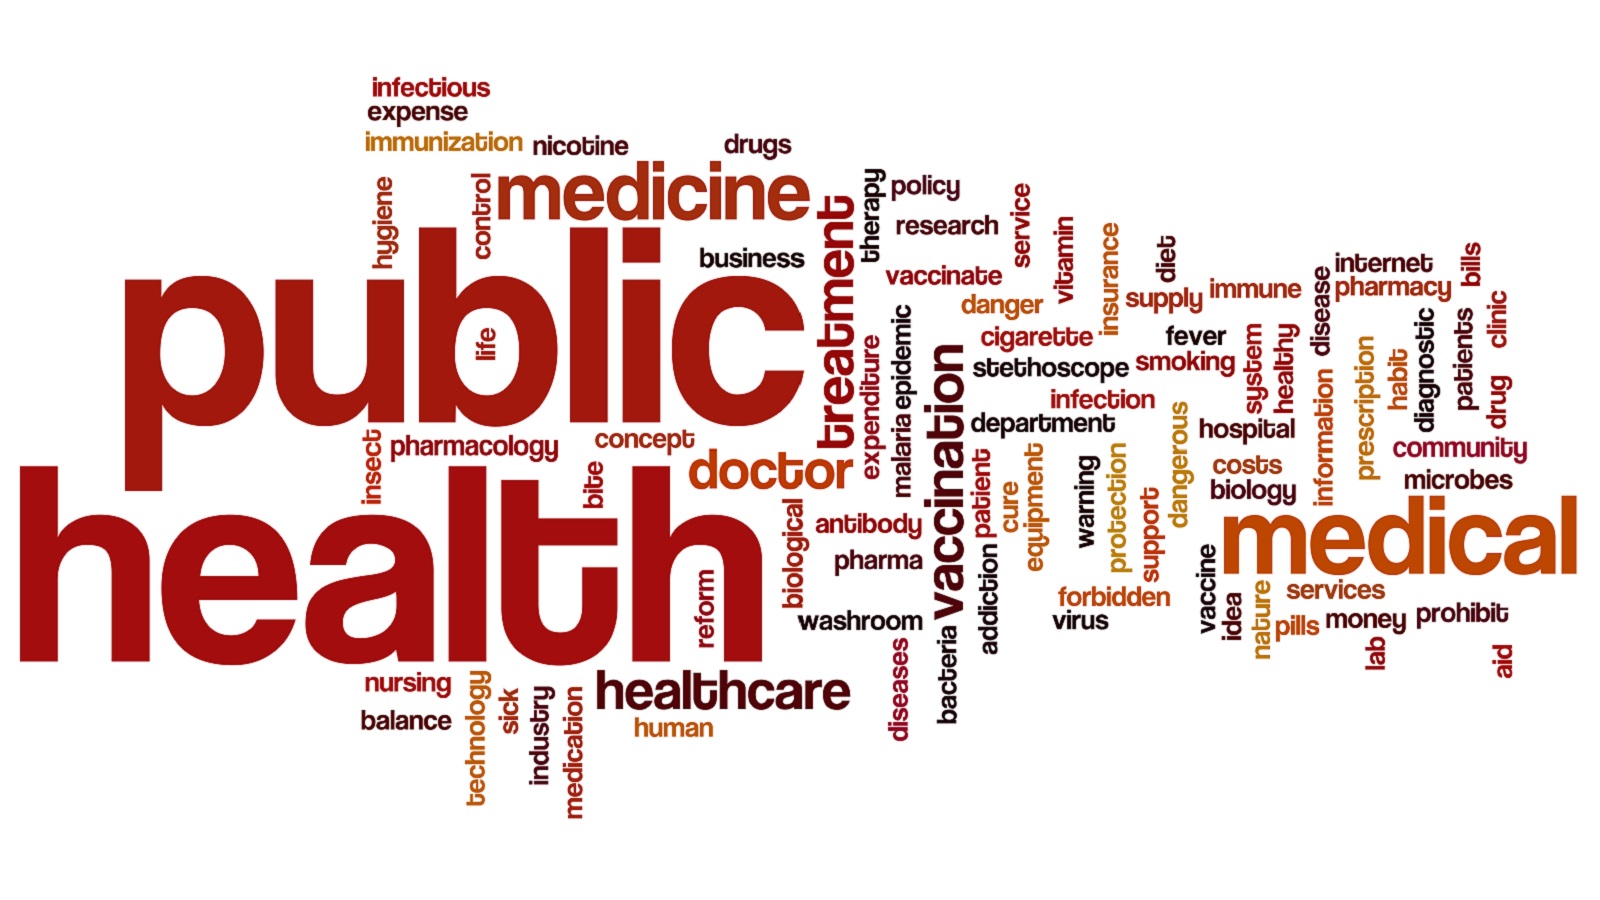 How Our Clinical Public Health Curriculum Equipped Us to Respond to COVID-19